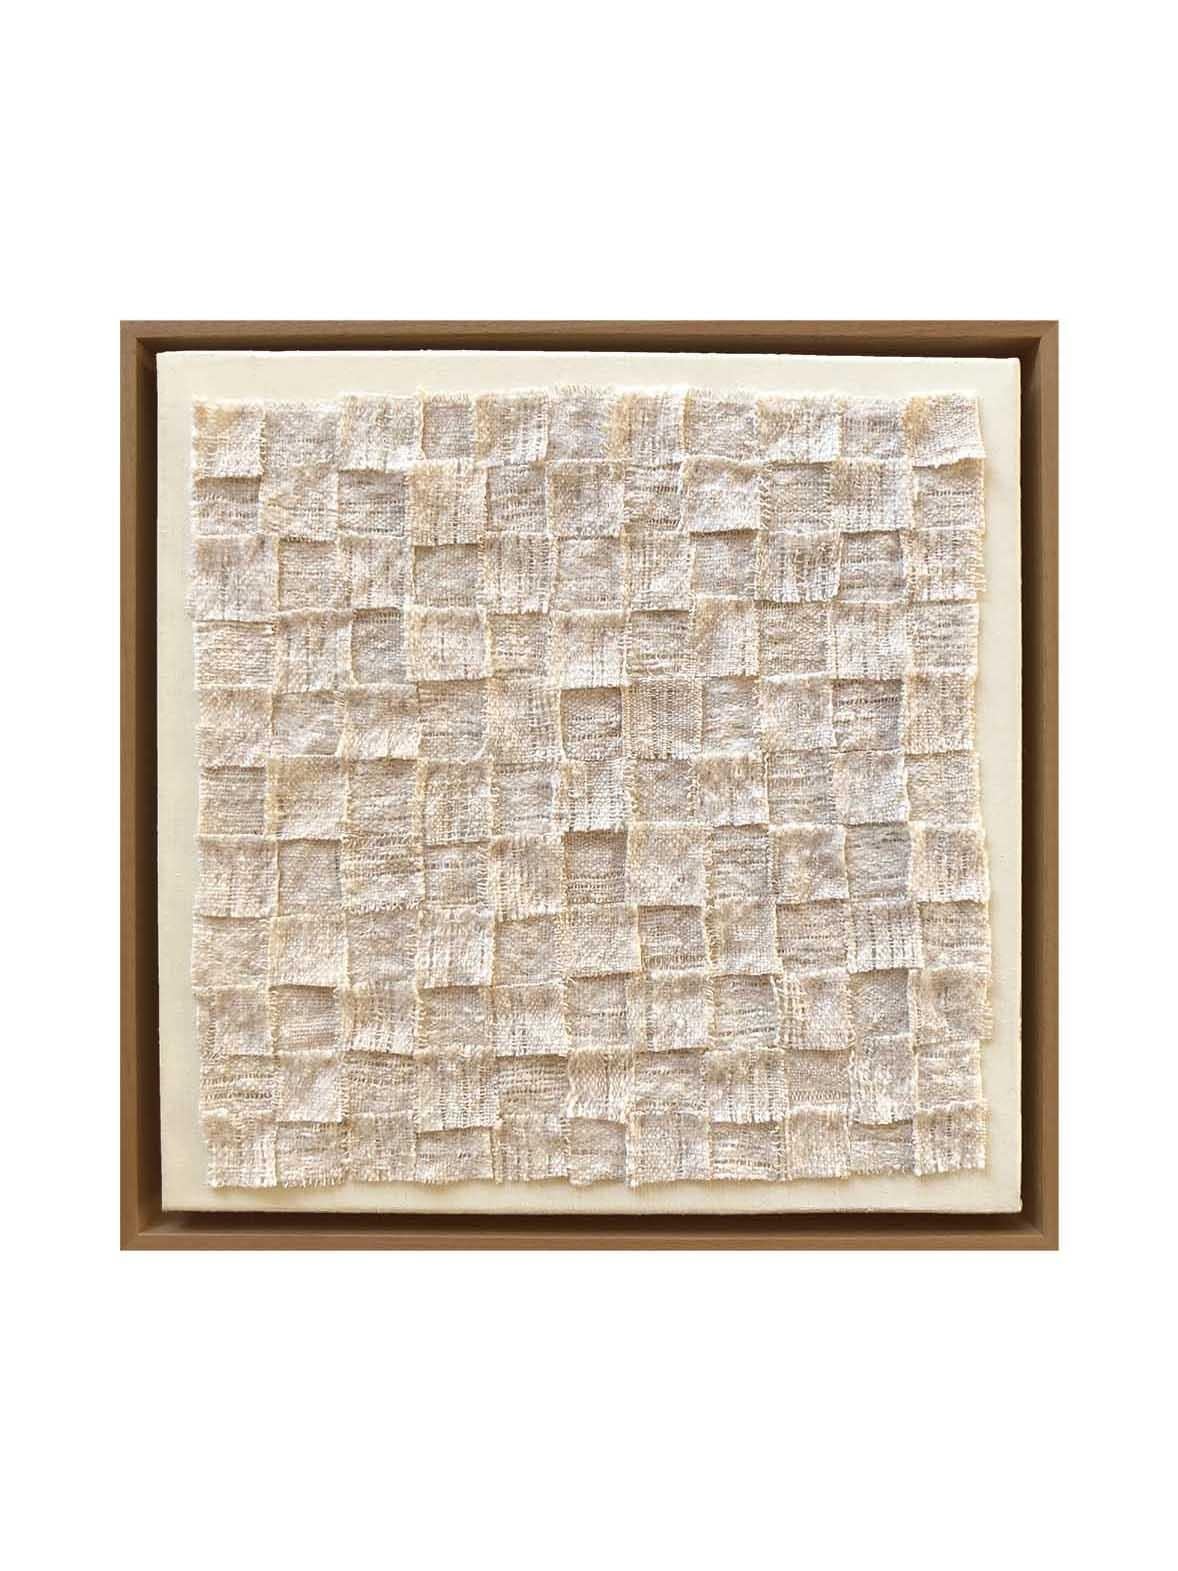 Hand-Woven White Textile Artwork Wall Piece, Made of handspun handwoven Wool For Sale